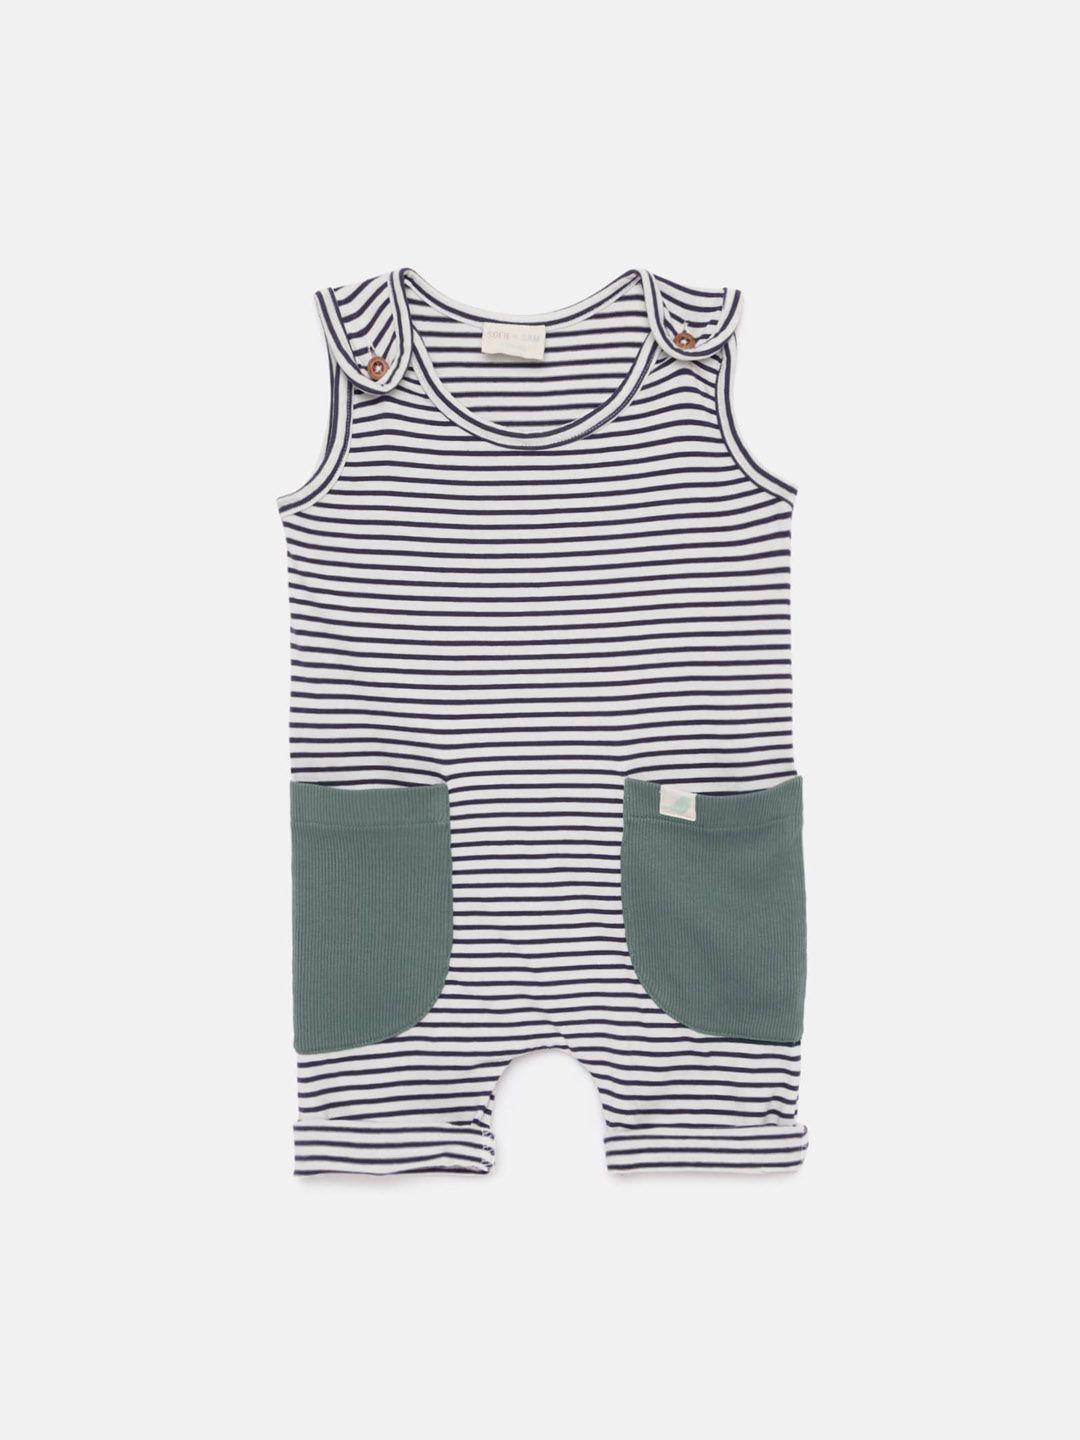 sofie & sam infant kids white & navy blue striped organic cotton sustainable rompers